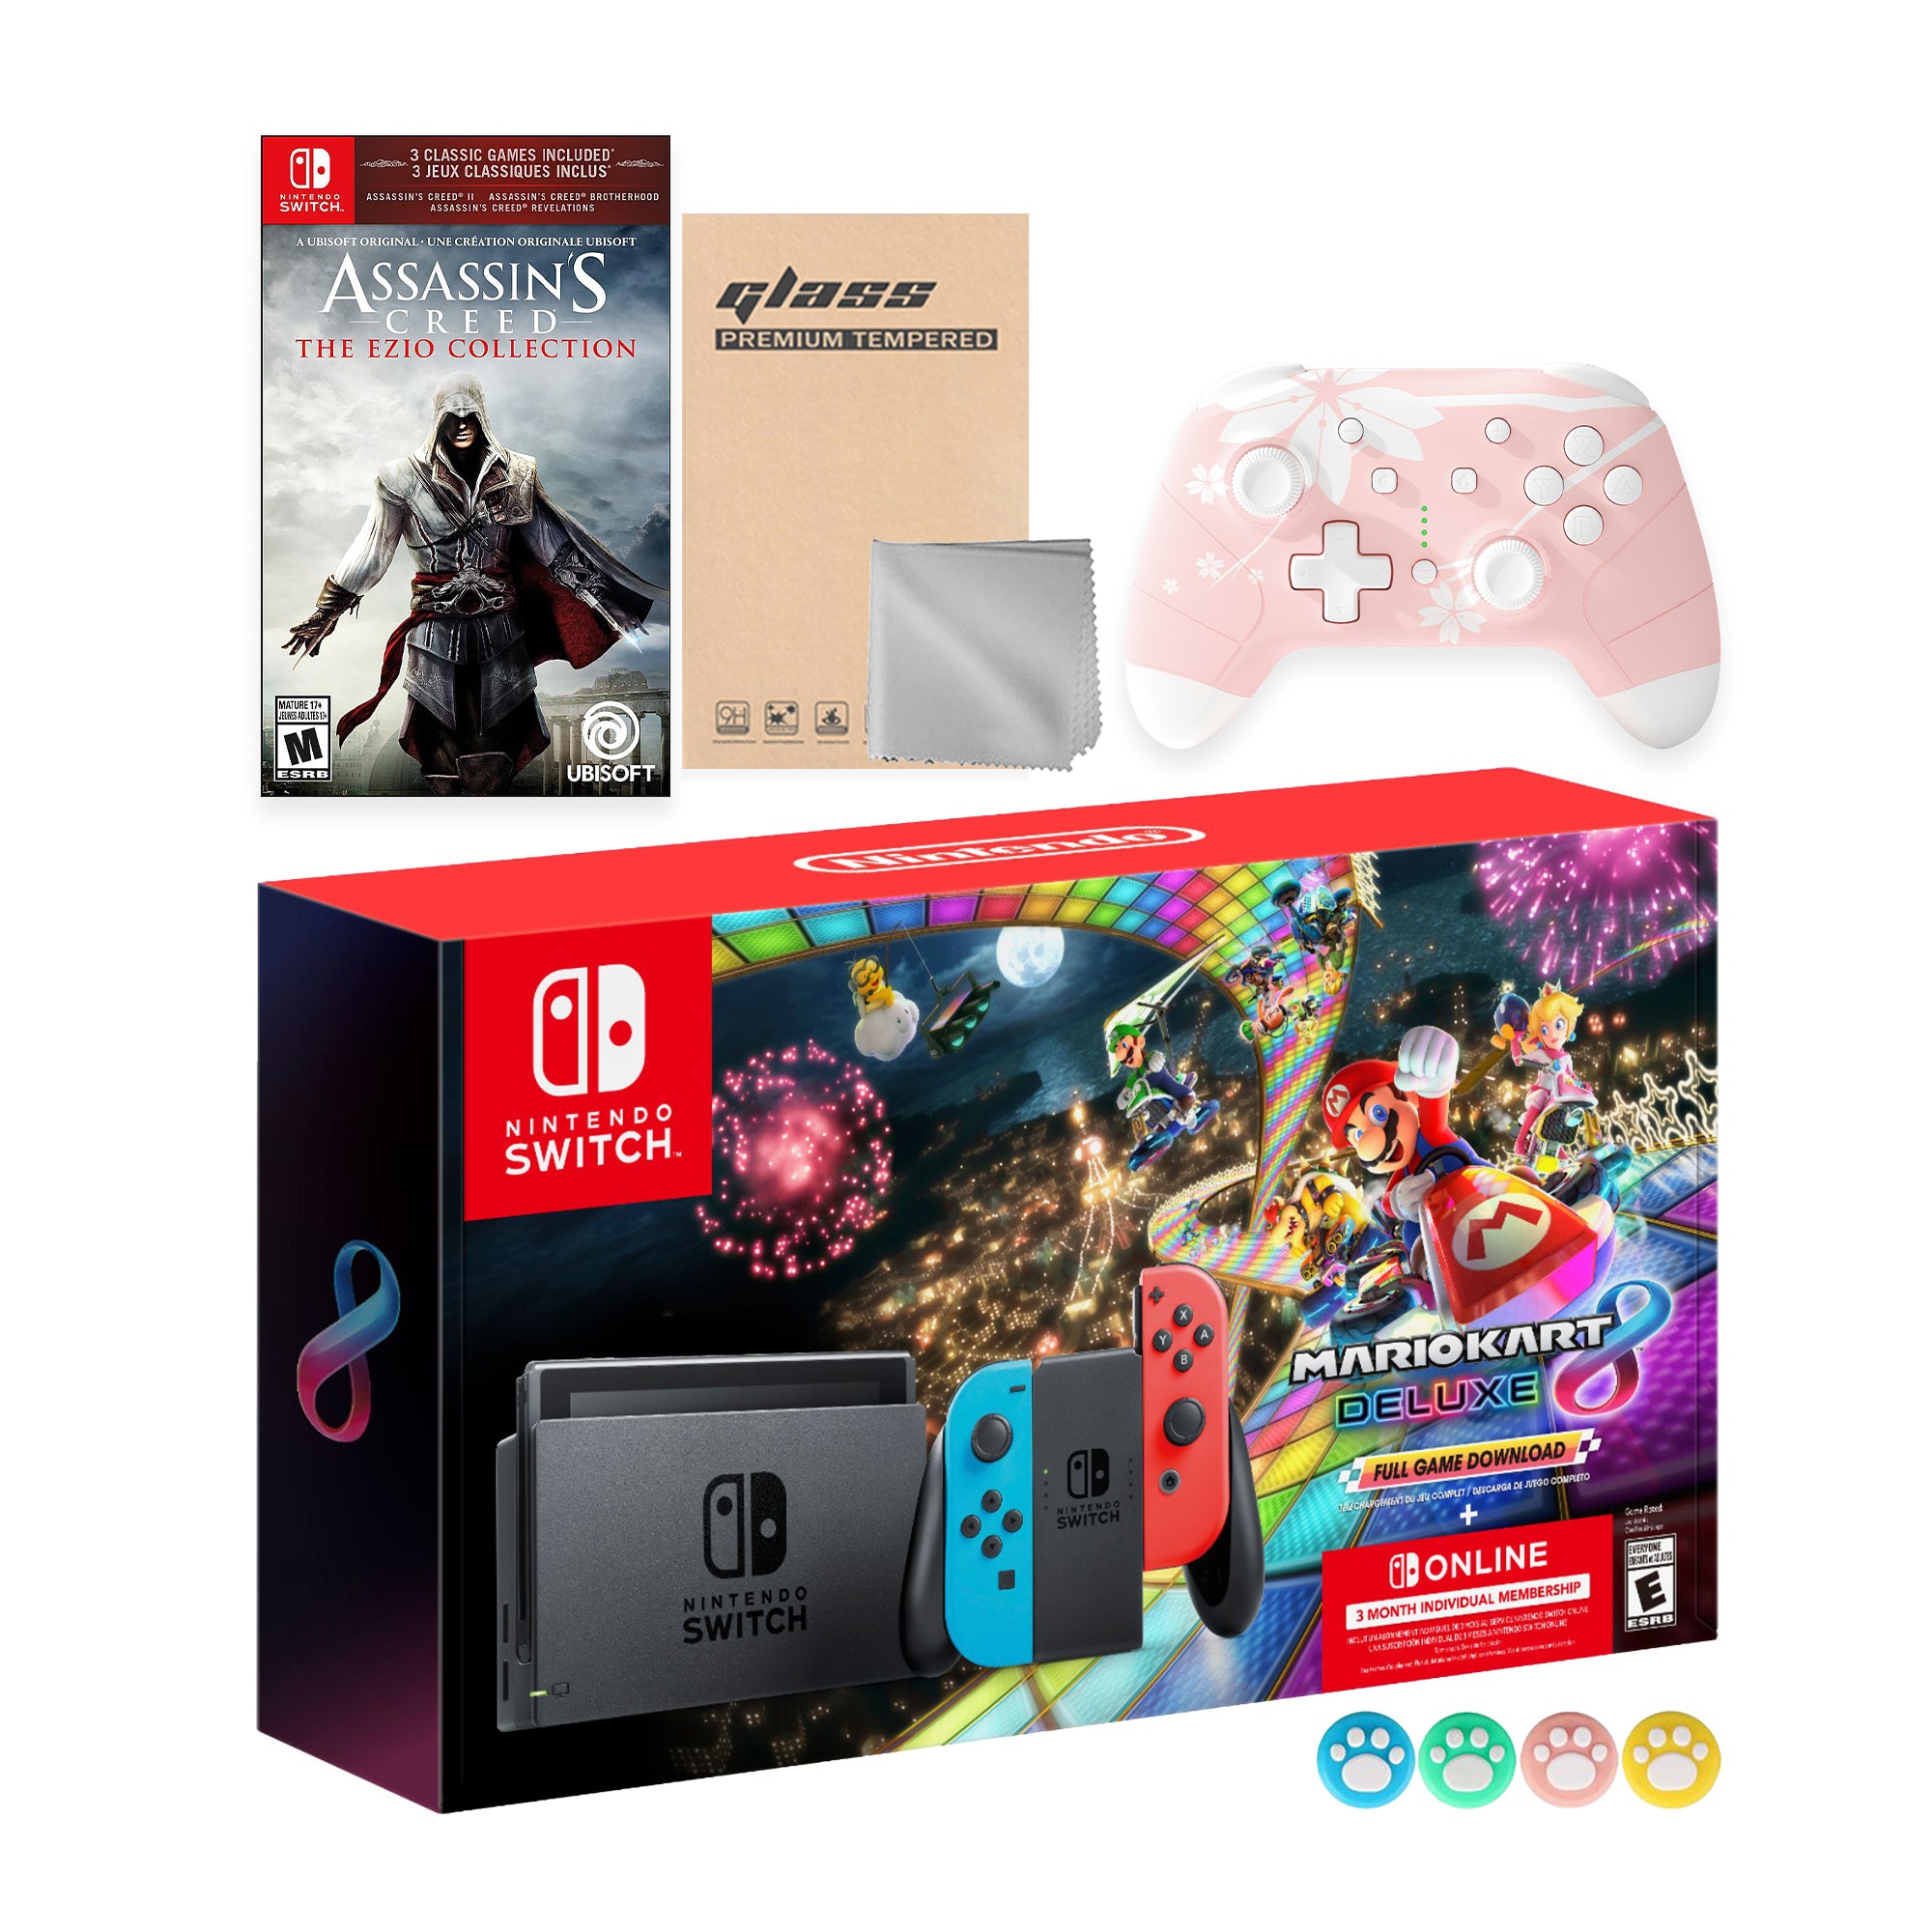 Nintendo Switch Mario Kart 8 Deluxe Bundle: Red Blue Console, Mario Kart 8 & Membership with Assassin's Creed Ezio Collection with Mytrix Wireless Pro Controller Sakura Pink and Accessories